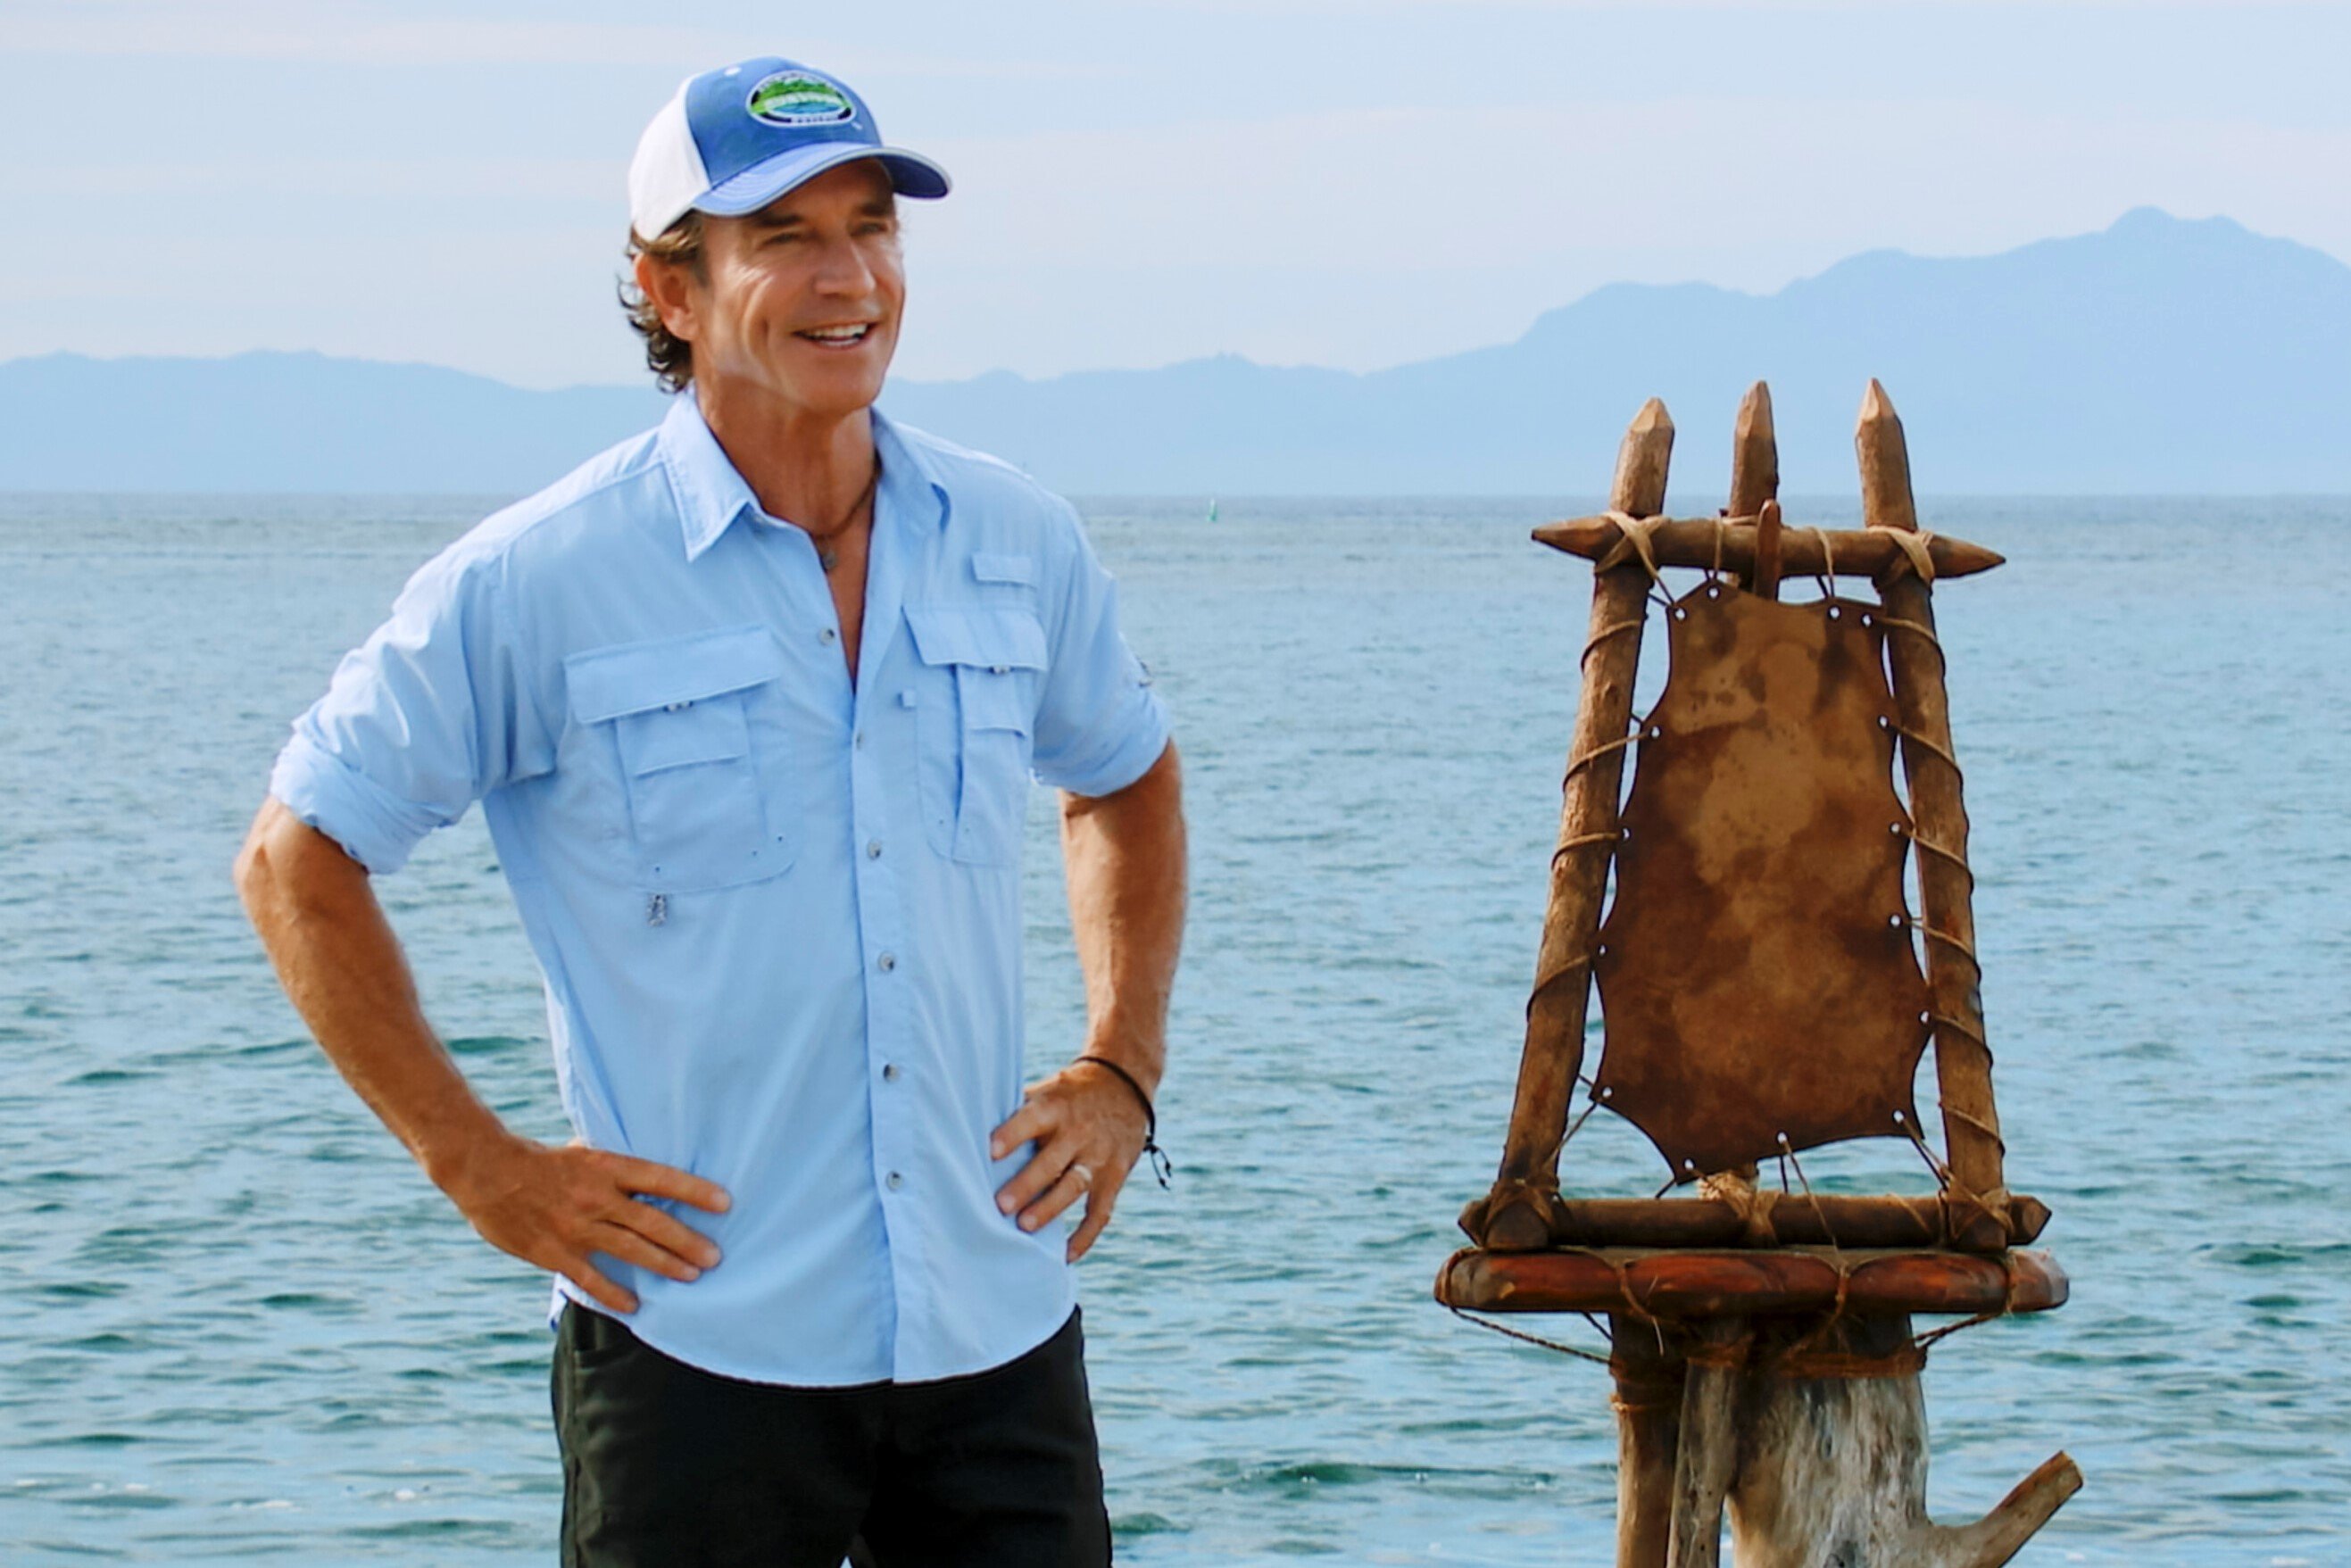 ‘Survivor’: 1 Former Castaway Argues the 26-Day Seasons Are ‘Not Hard’